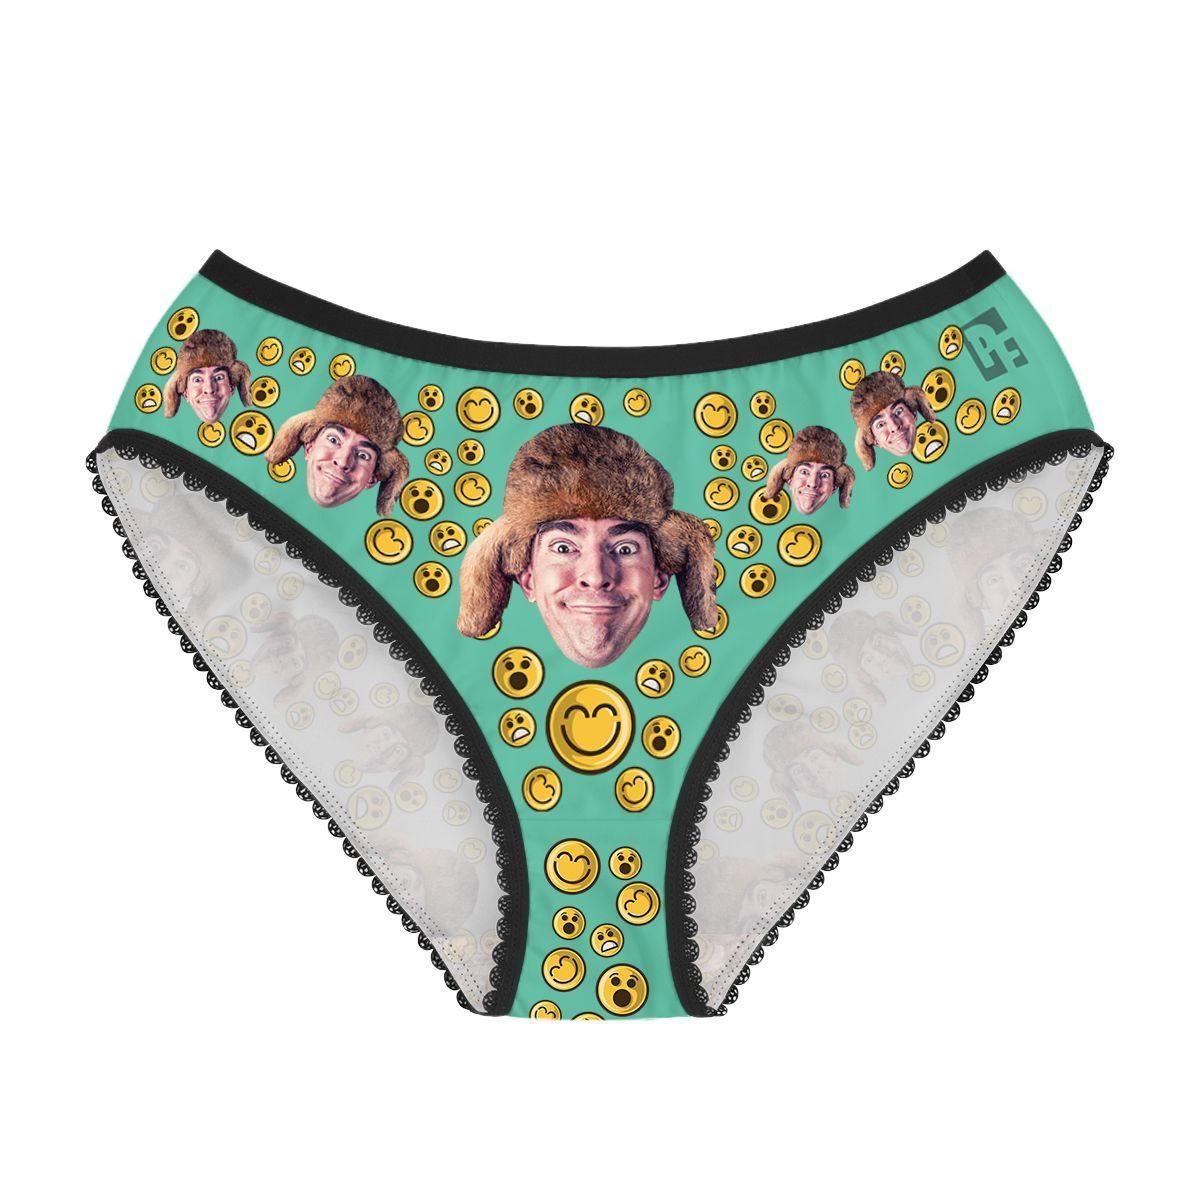 Mint Smiles women's underwear briefs personalized with photo printed on them